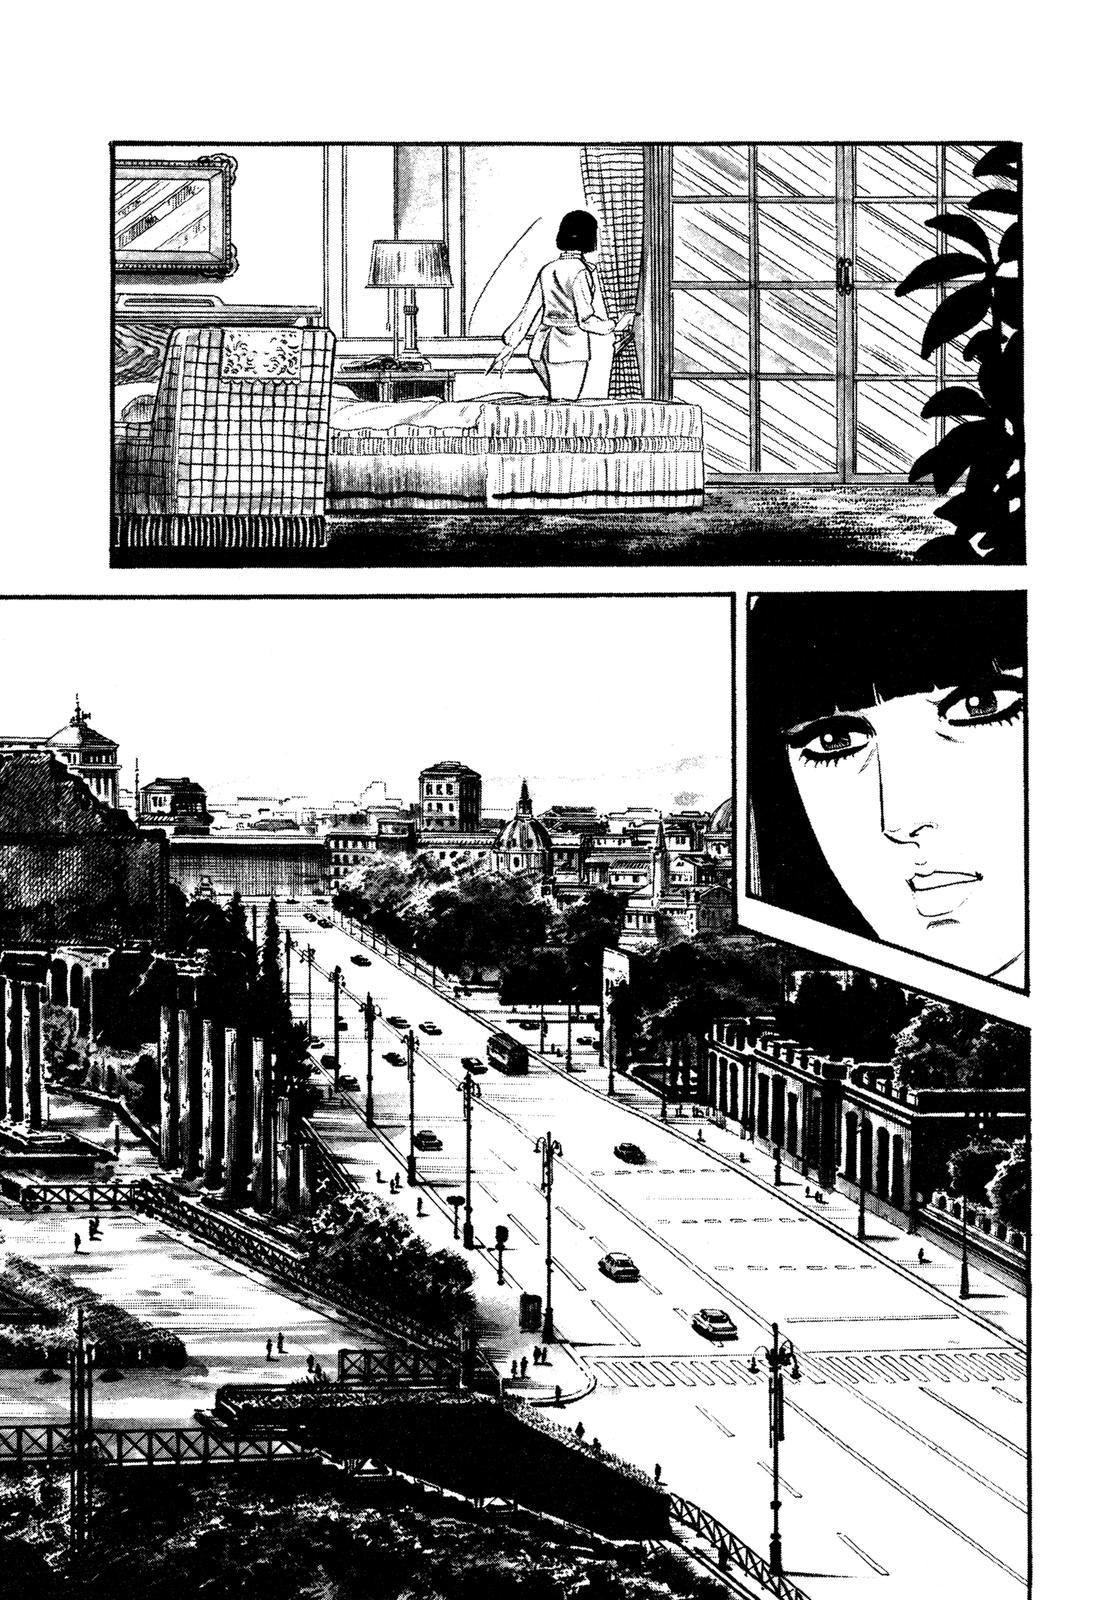 Doll: The Hotel Detective Vol. 2 Ch. 8 Rome in the Twilight